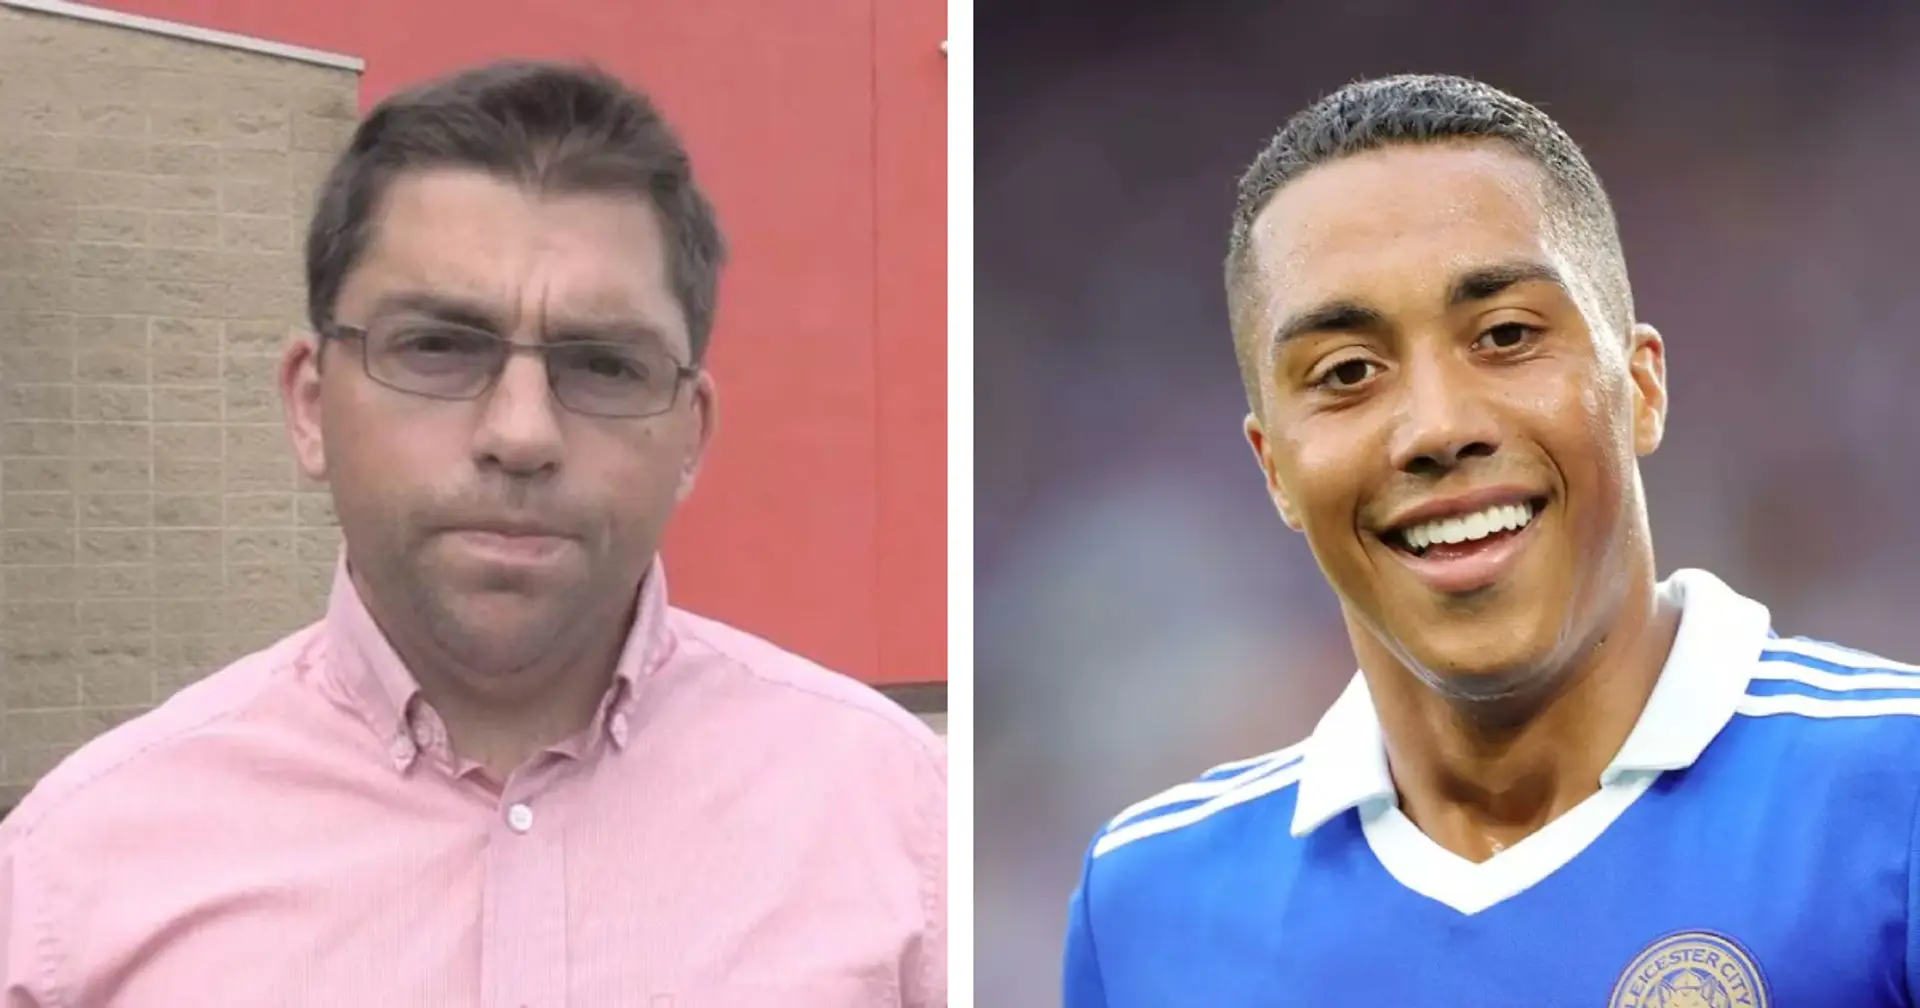 James Pearce names 2 relegation fodder players as 'possibilities' for Liverpool - one is Tielemans